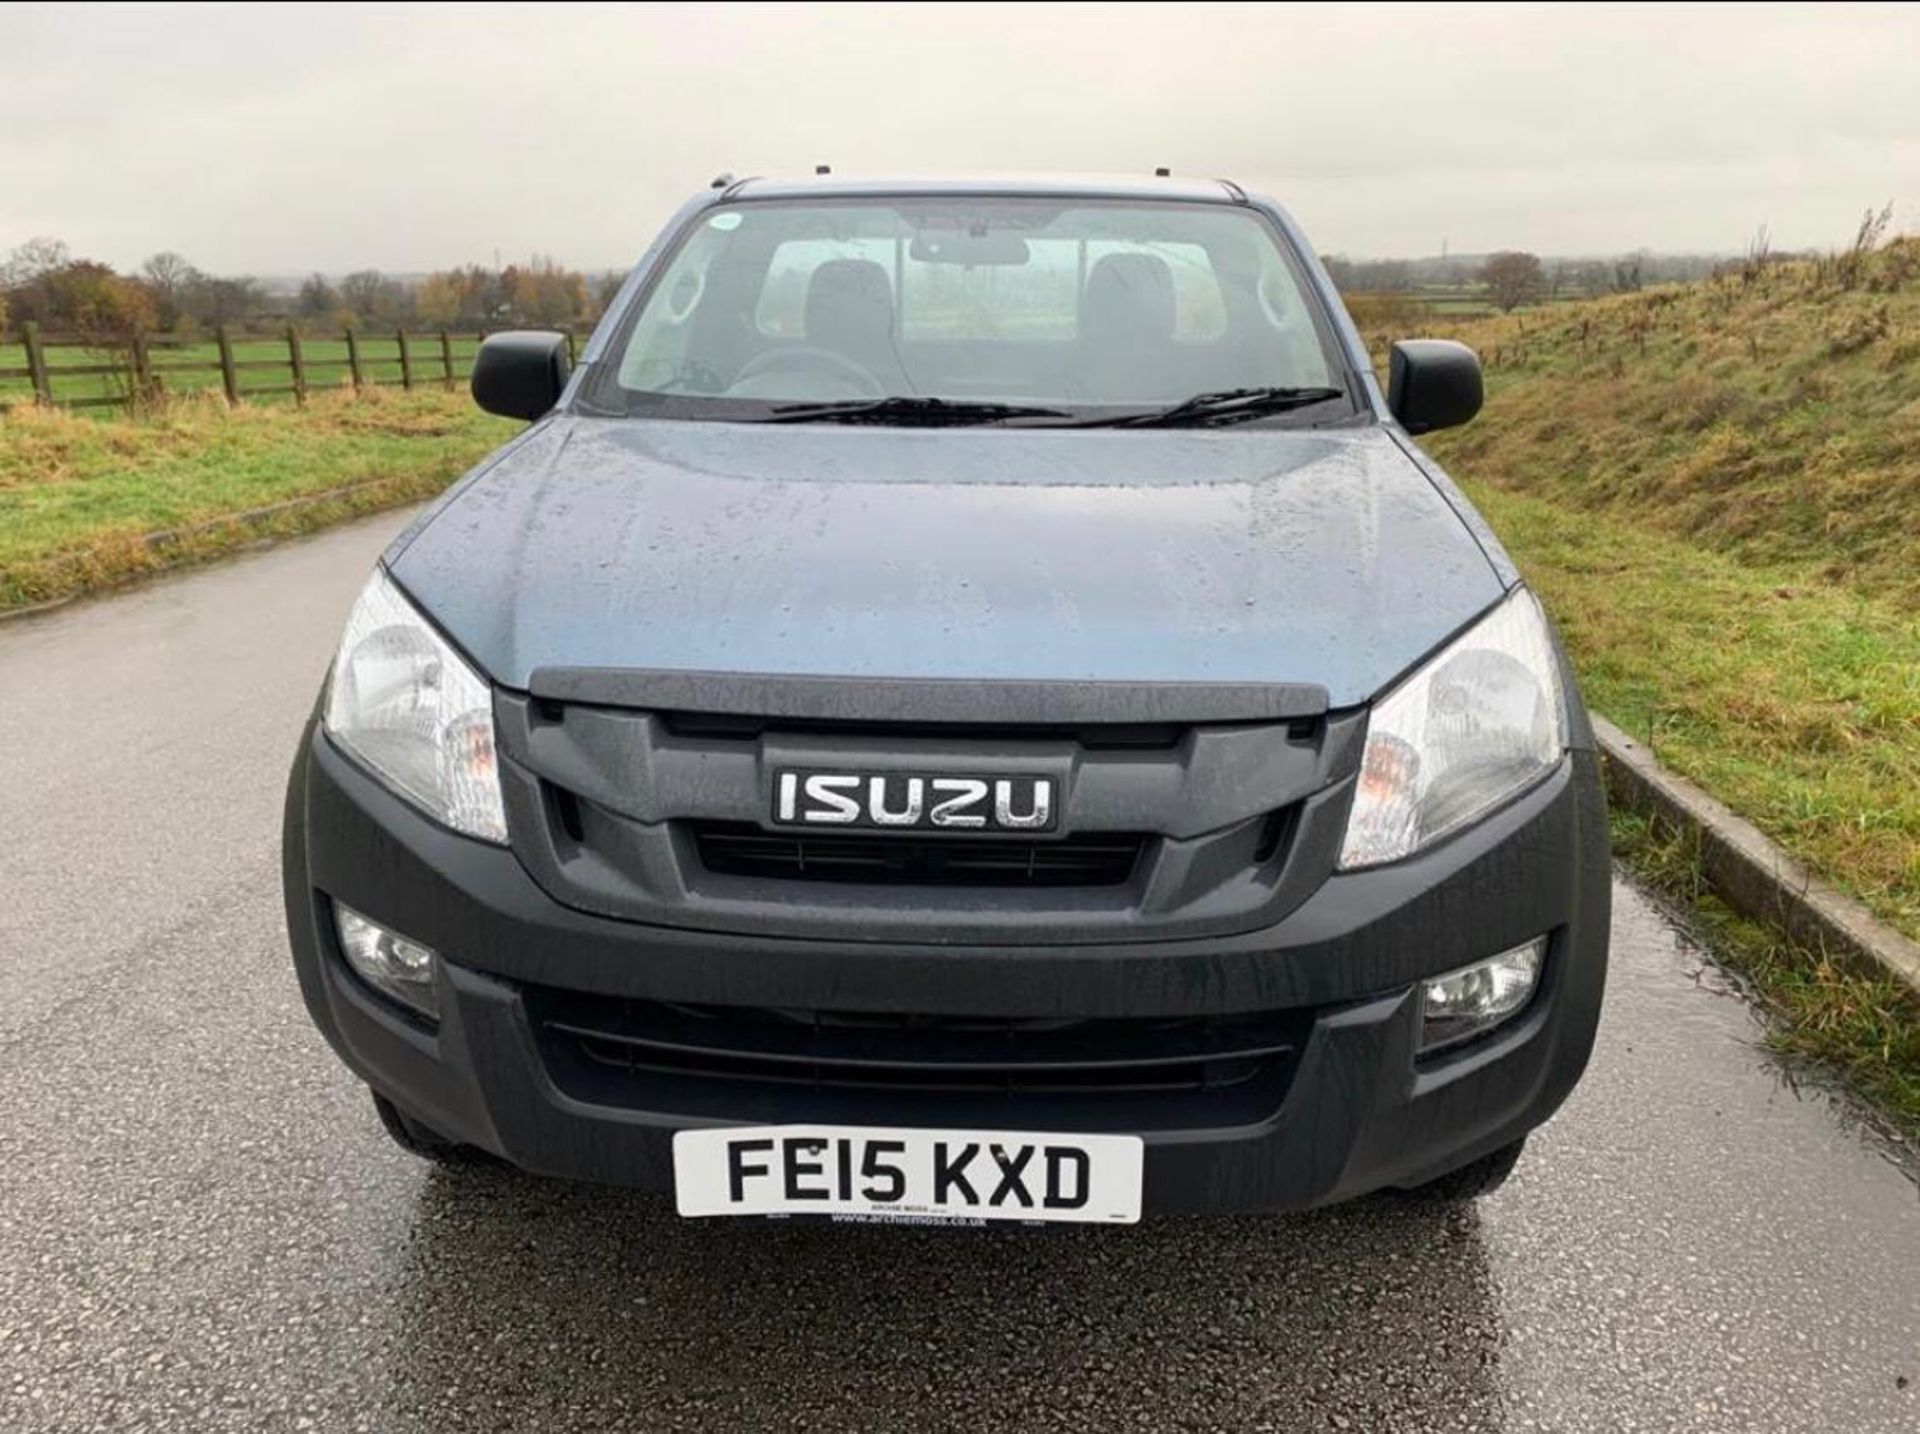 2015/15 REG ISUZU D-MAX S/C TWIN TURBO 4X4 TD 2.5 DIESEL PICK-UP, SHOWING 0 FORMER KEEPERS *NO VAT* - Image 2 of 10